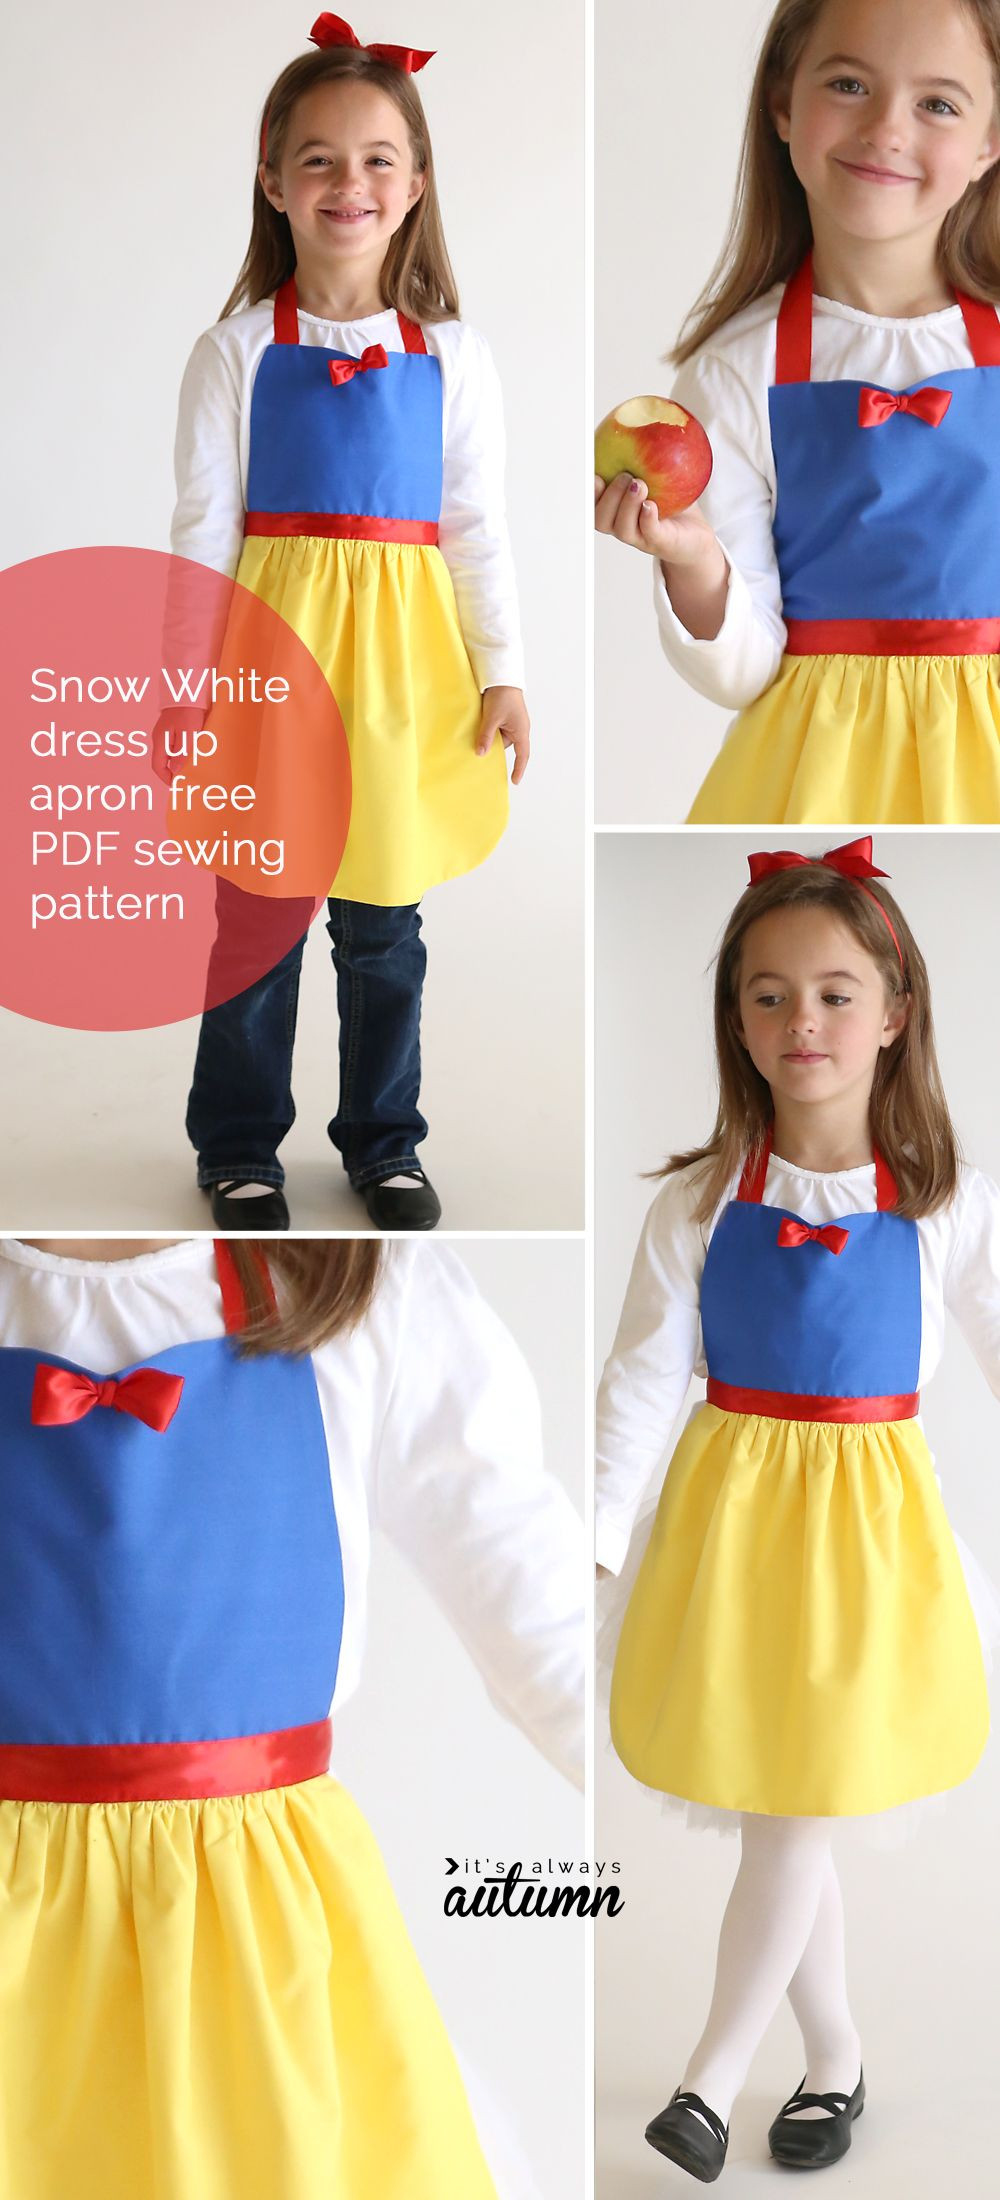 DIY Snow White Costume Toddler
 free sewing pattern for Snow White princess dress up apron